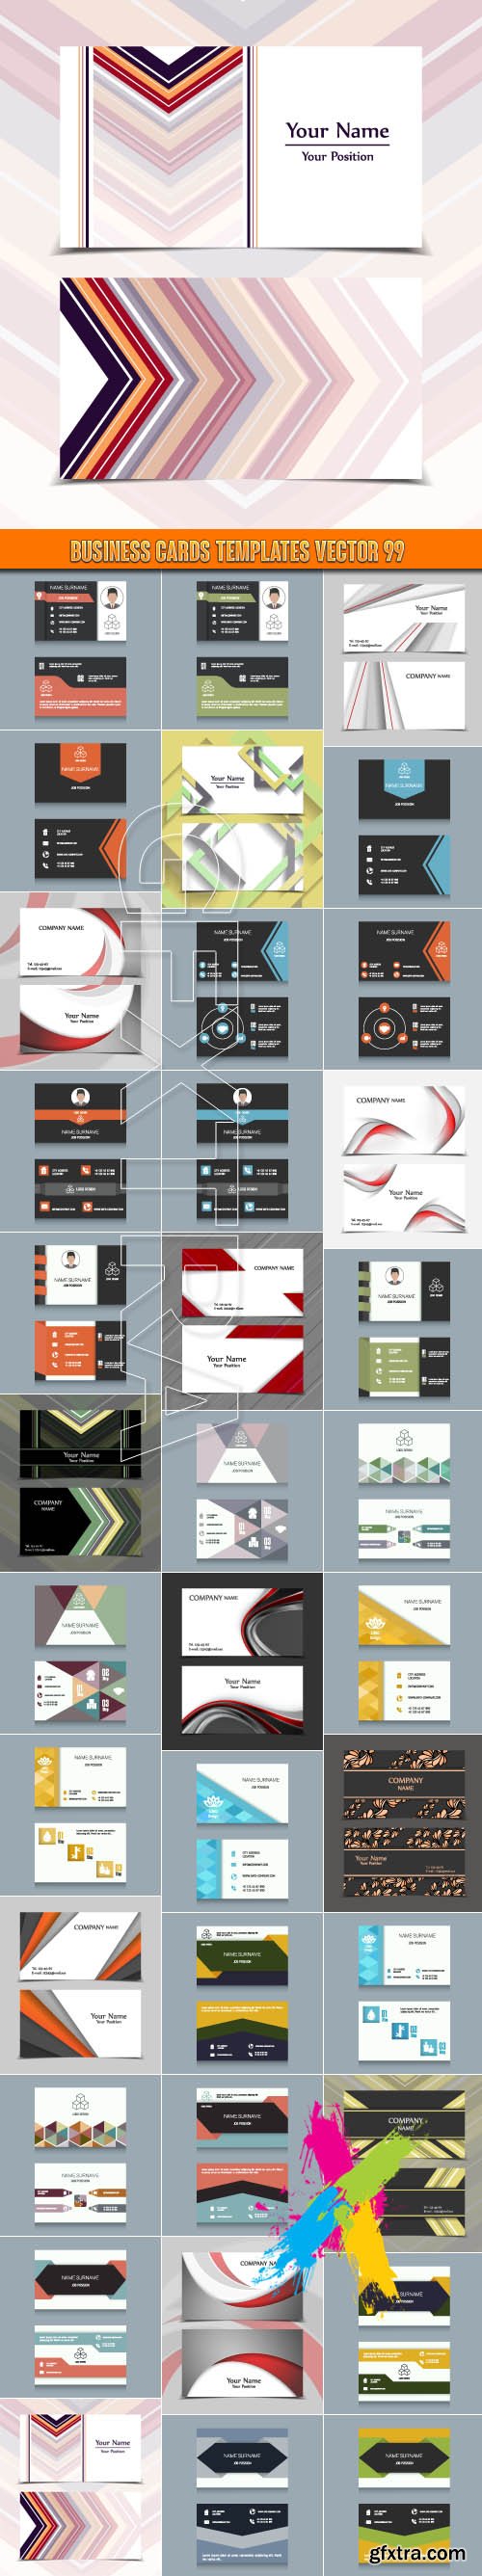 Business Cards Templates vector 99